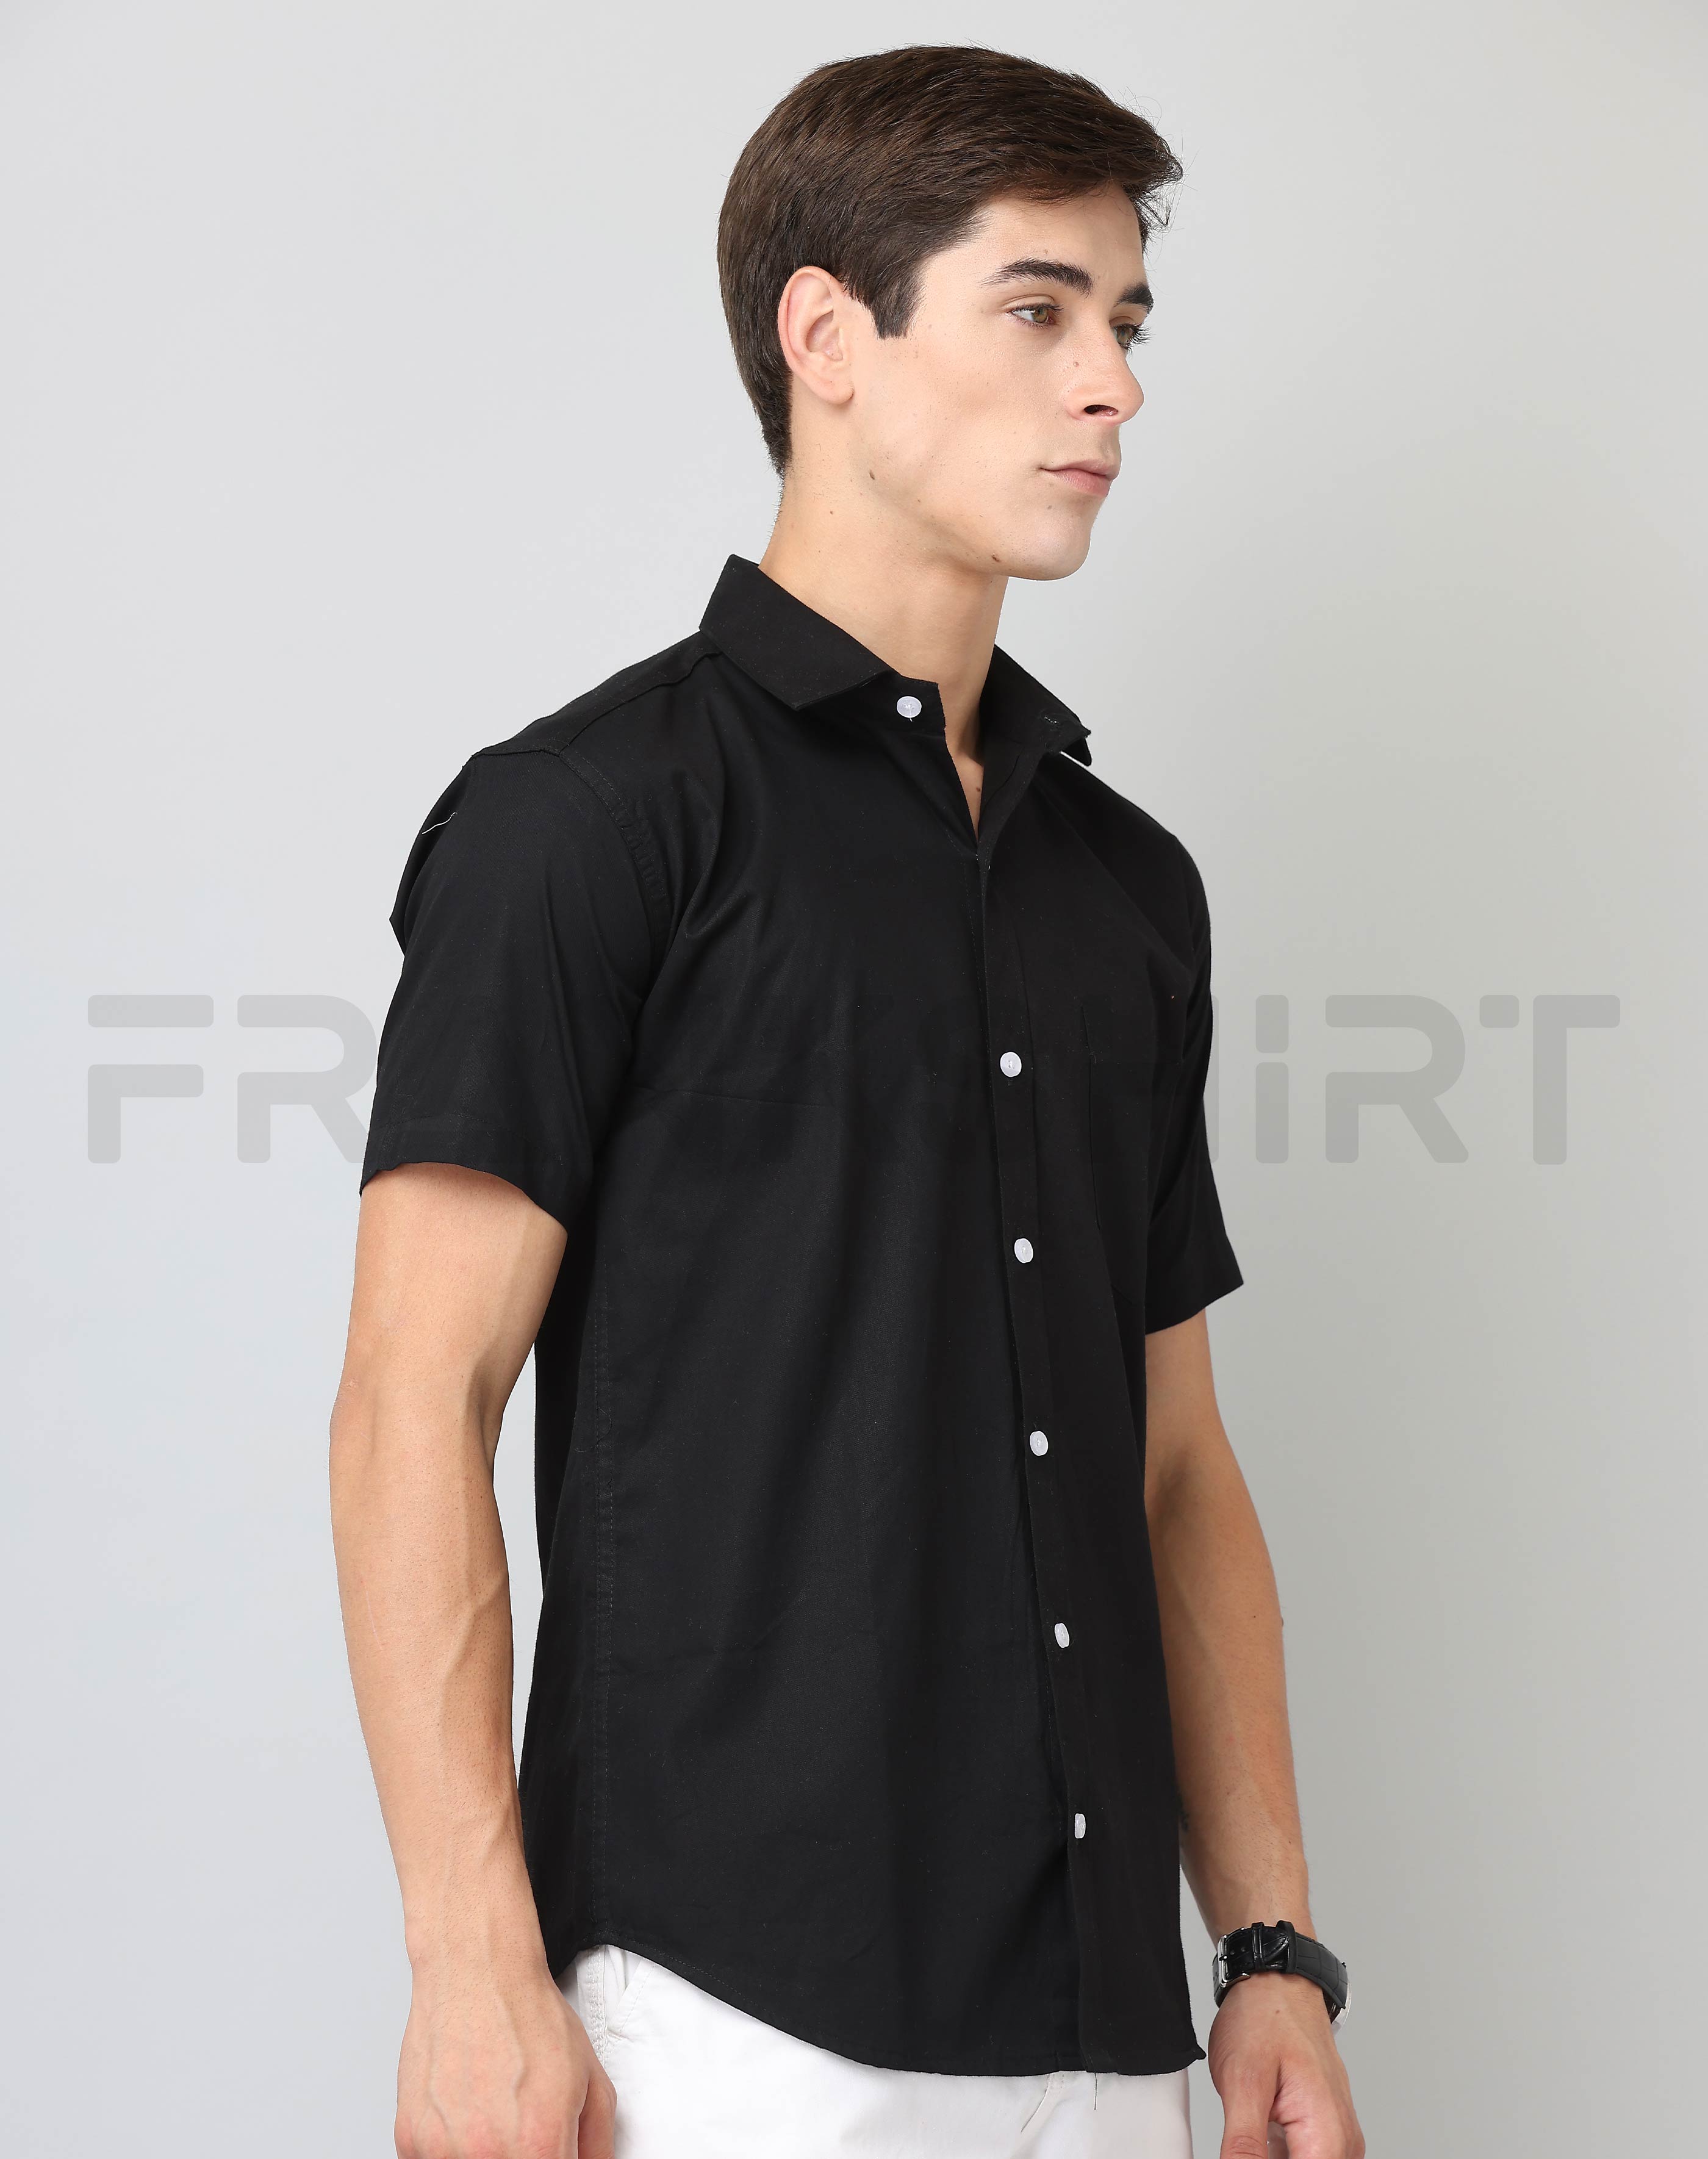 Frankshirt Half Sleeve Black Tailored Fit Cotton Casual Shirt for Man